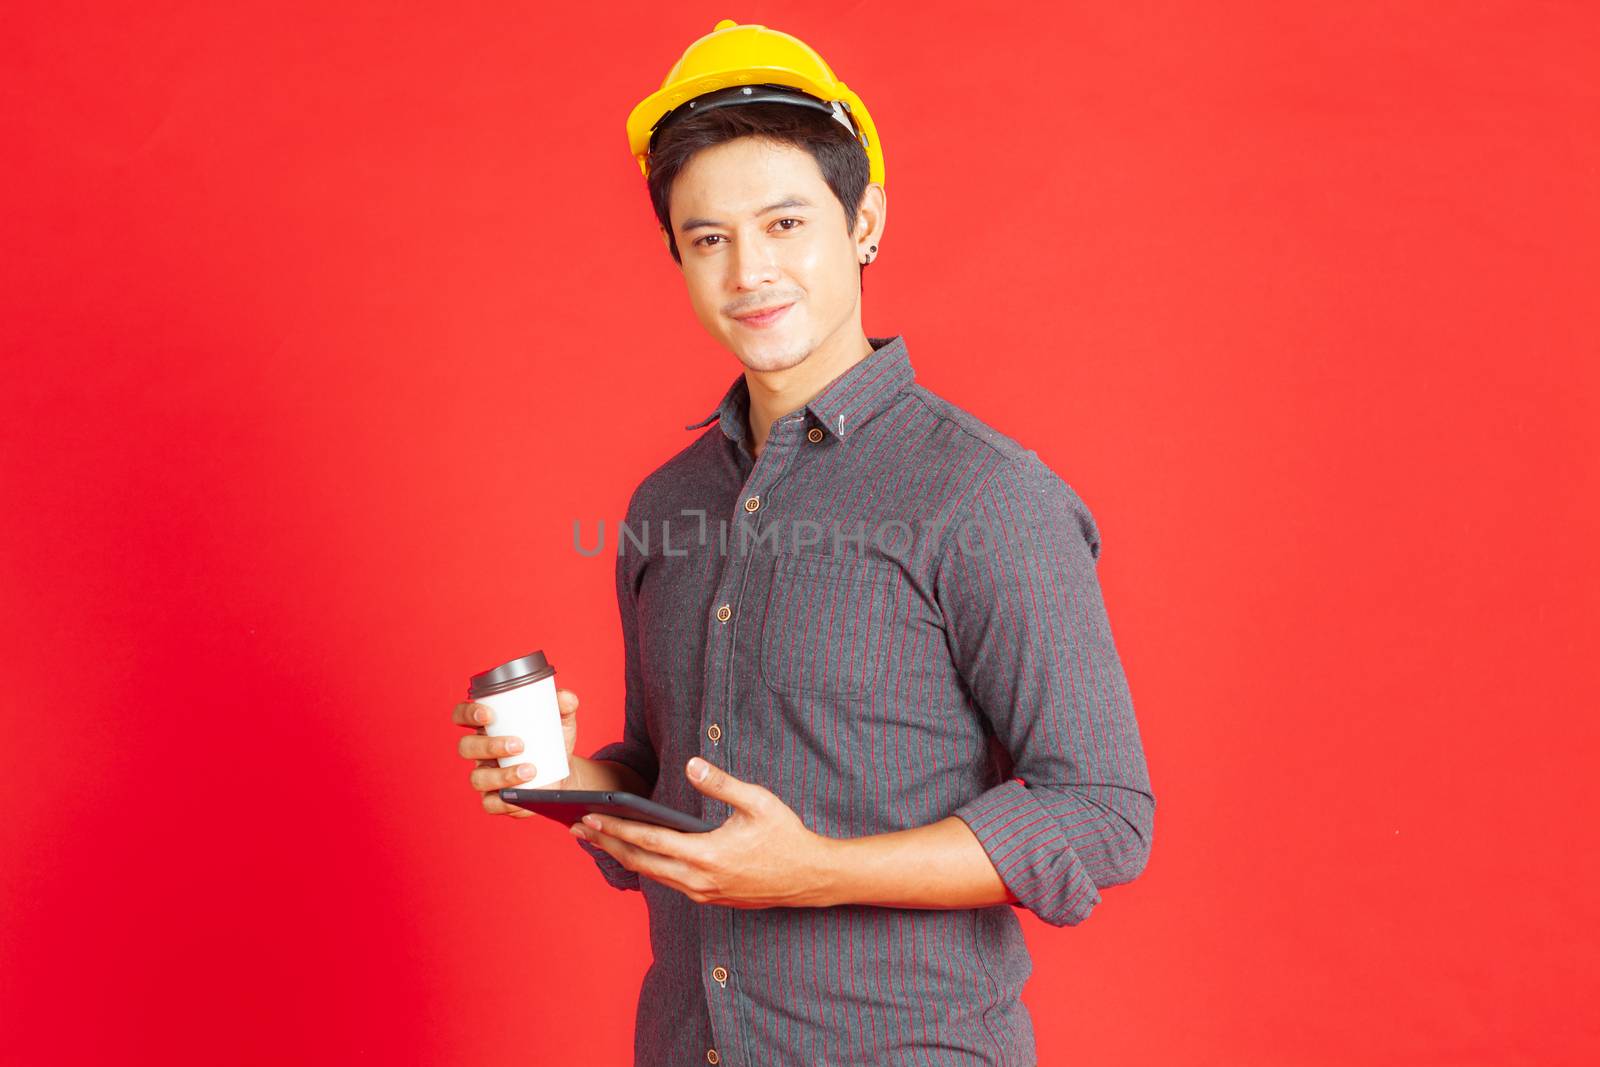 A portrait of a young engineer standing on a red background smiling and enjoying the taste of coffee during the lunch break.